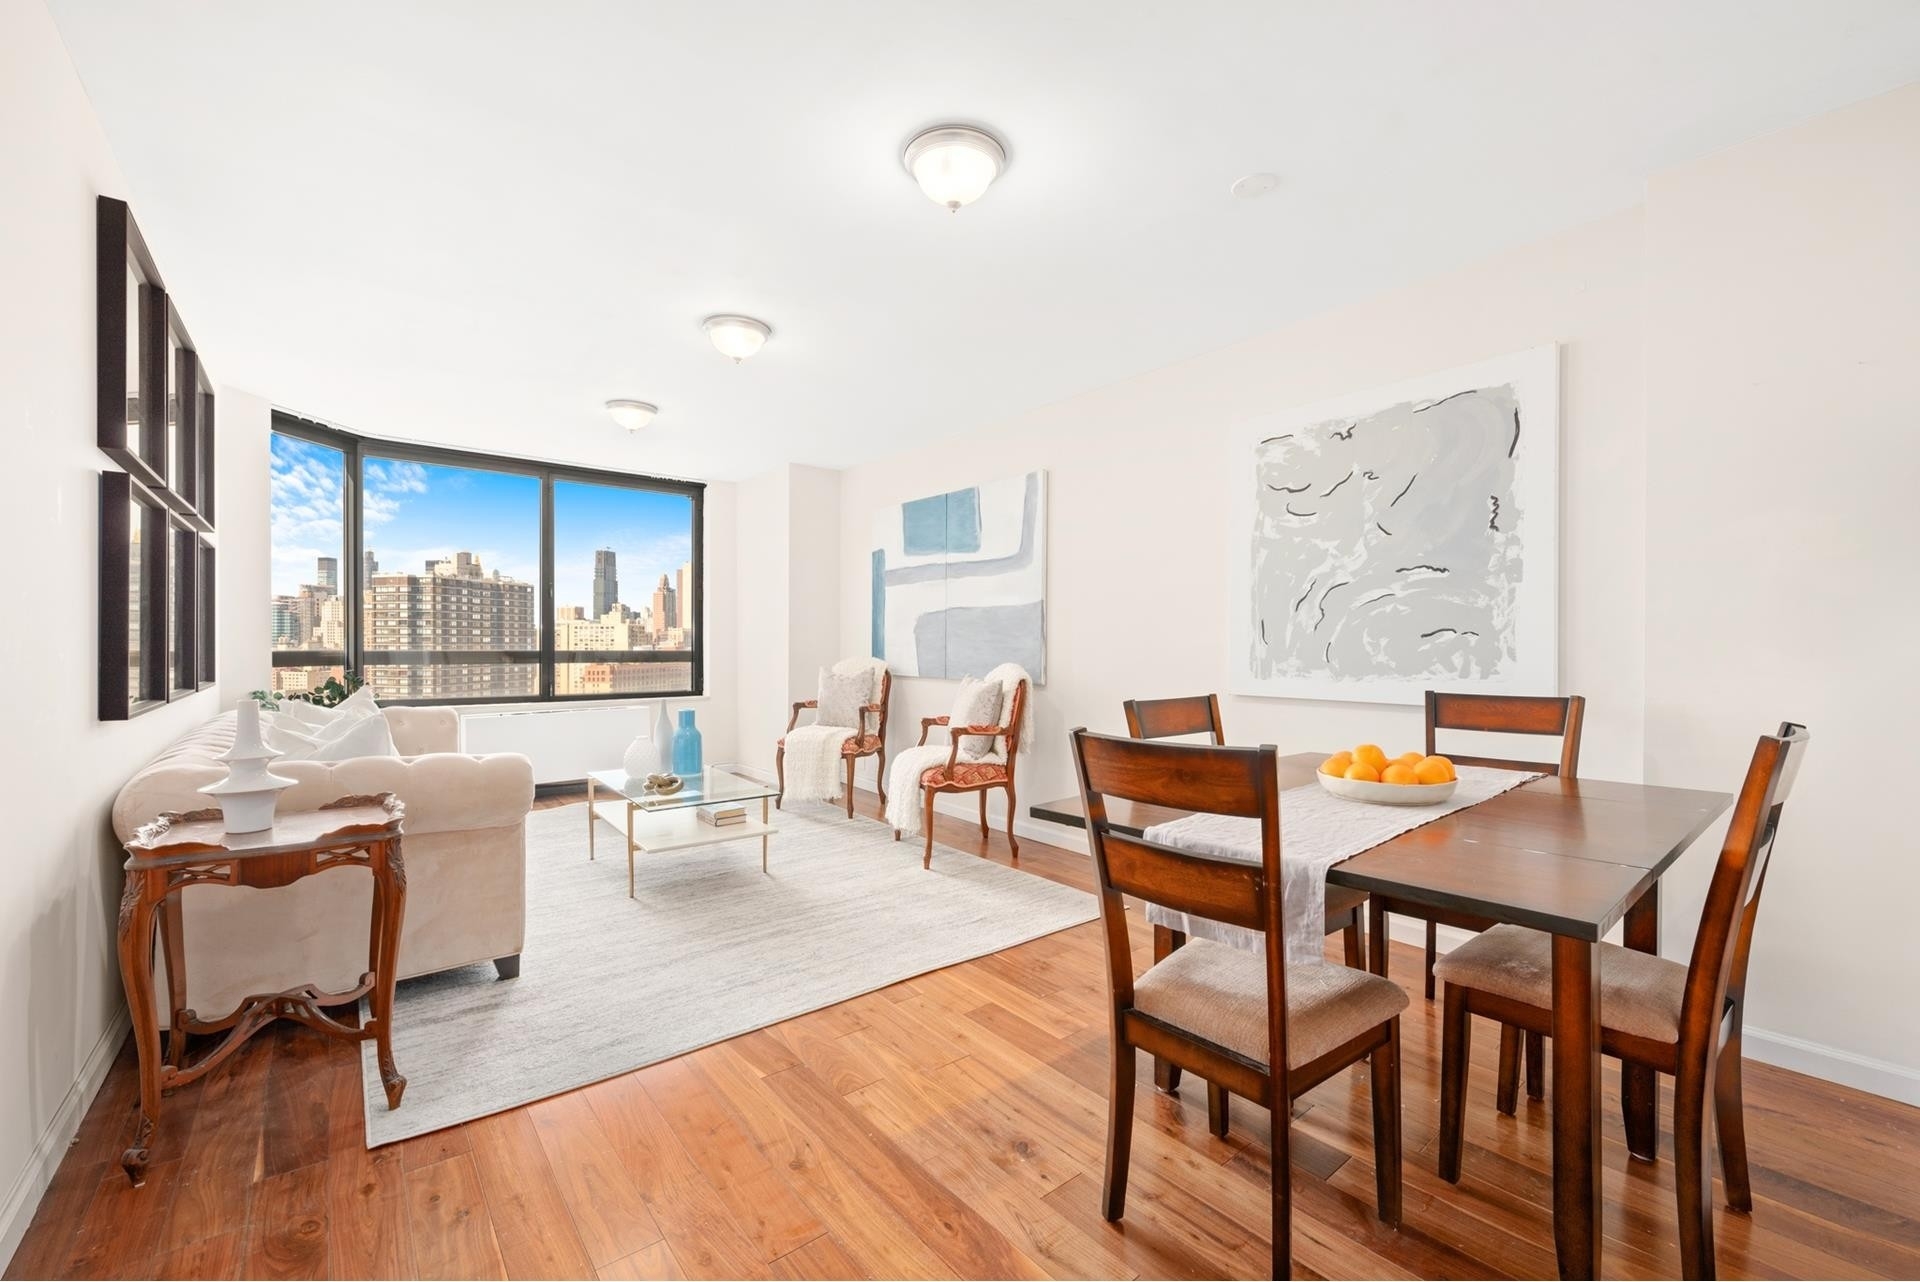 Condominium for Sale at Manhattan Place, 630 FIRST AVE, 31G Murray Hill, New York, NY 10016